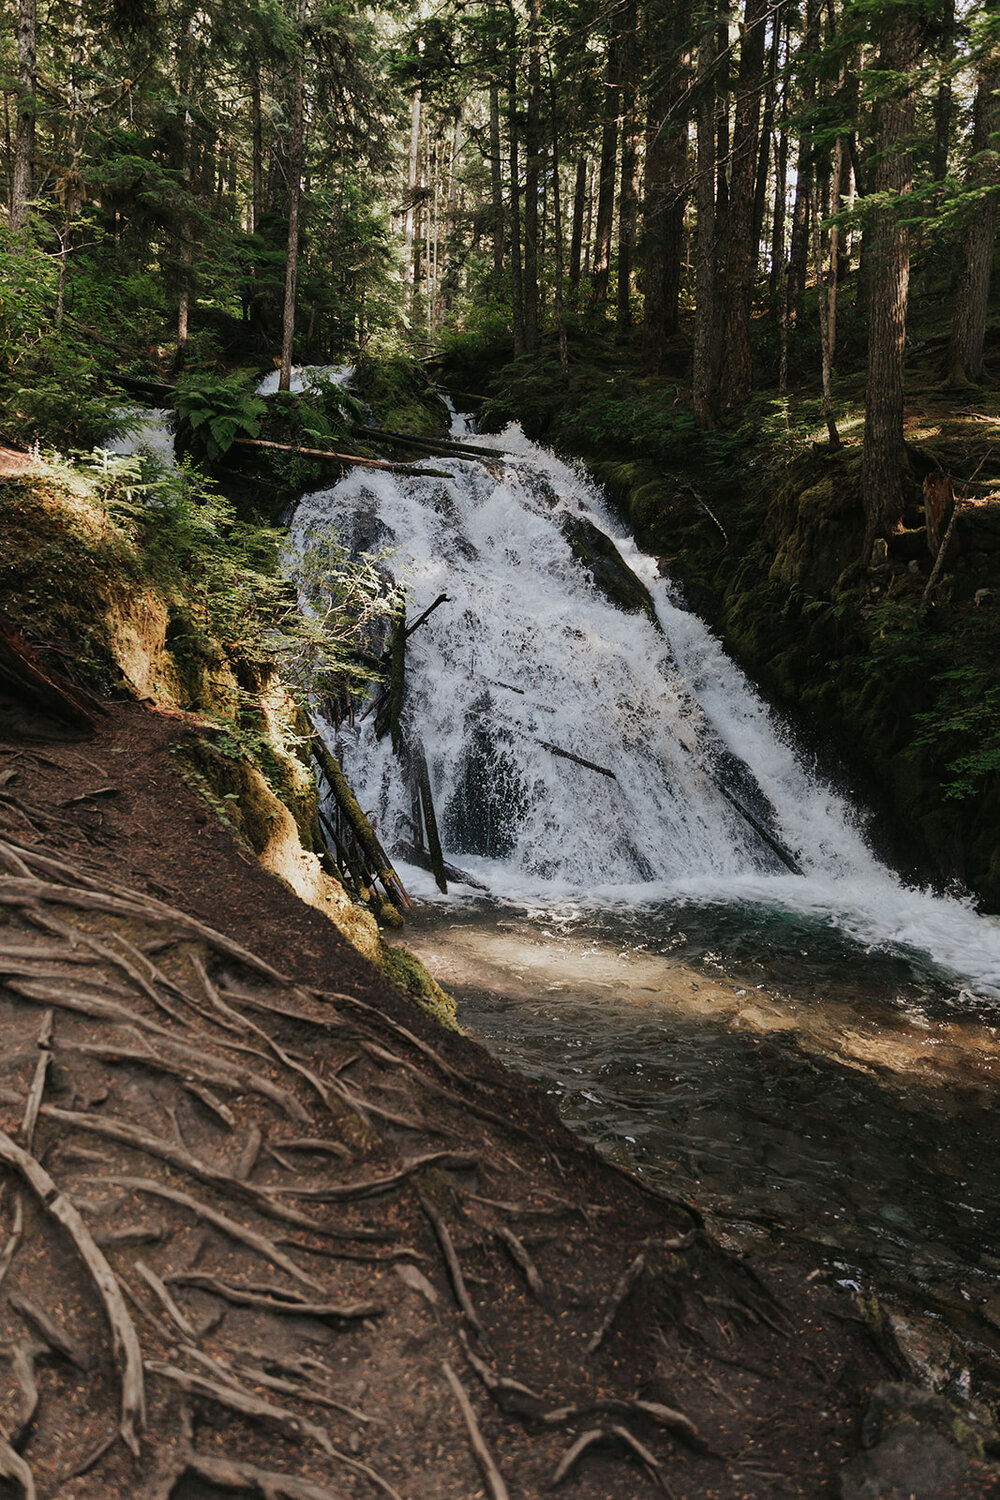 Pictured here is Little ZigZag Falls in the Summer - This is the view of the waterfall from the end of the trail. To the left of the view (not pictured) there is a bench.